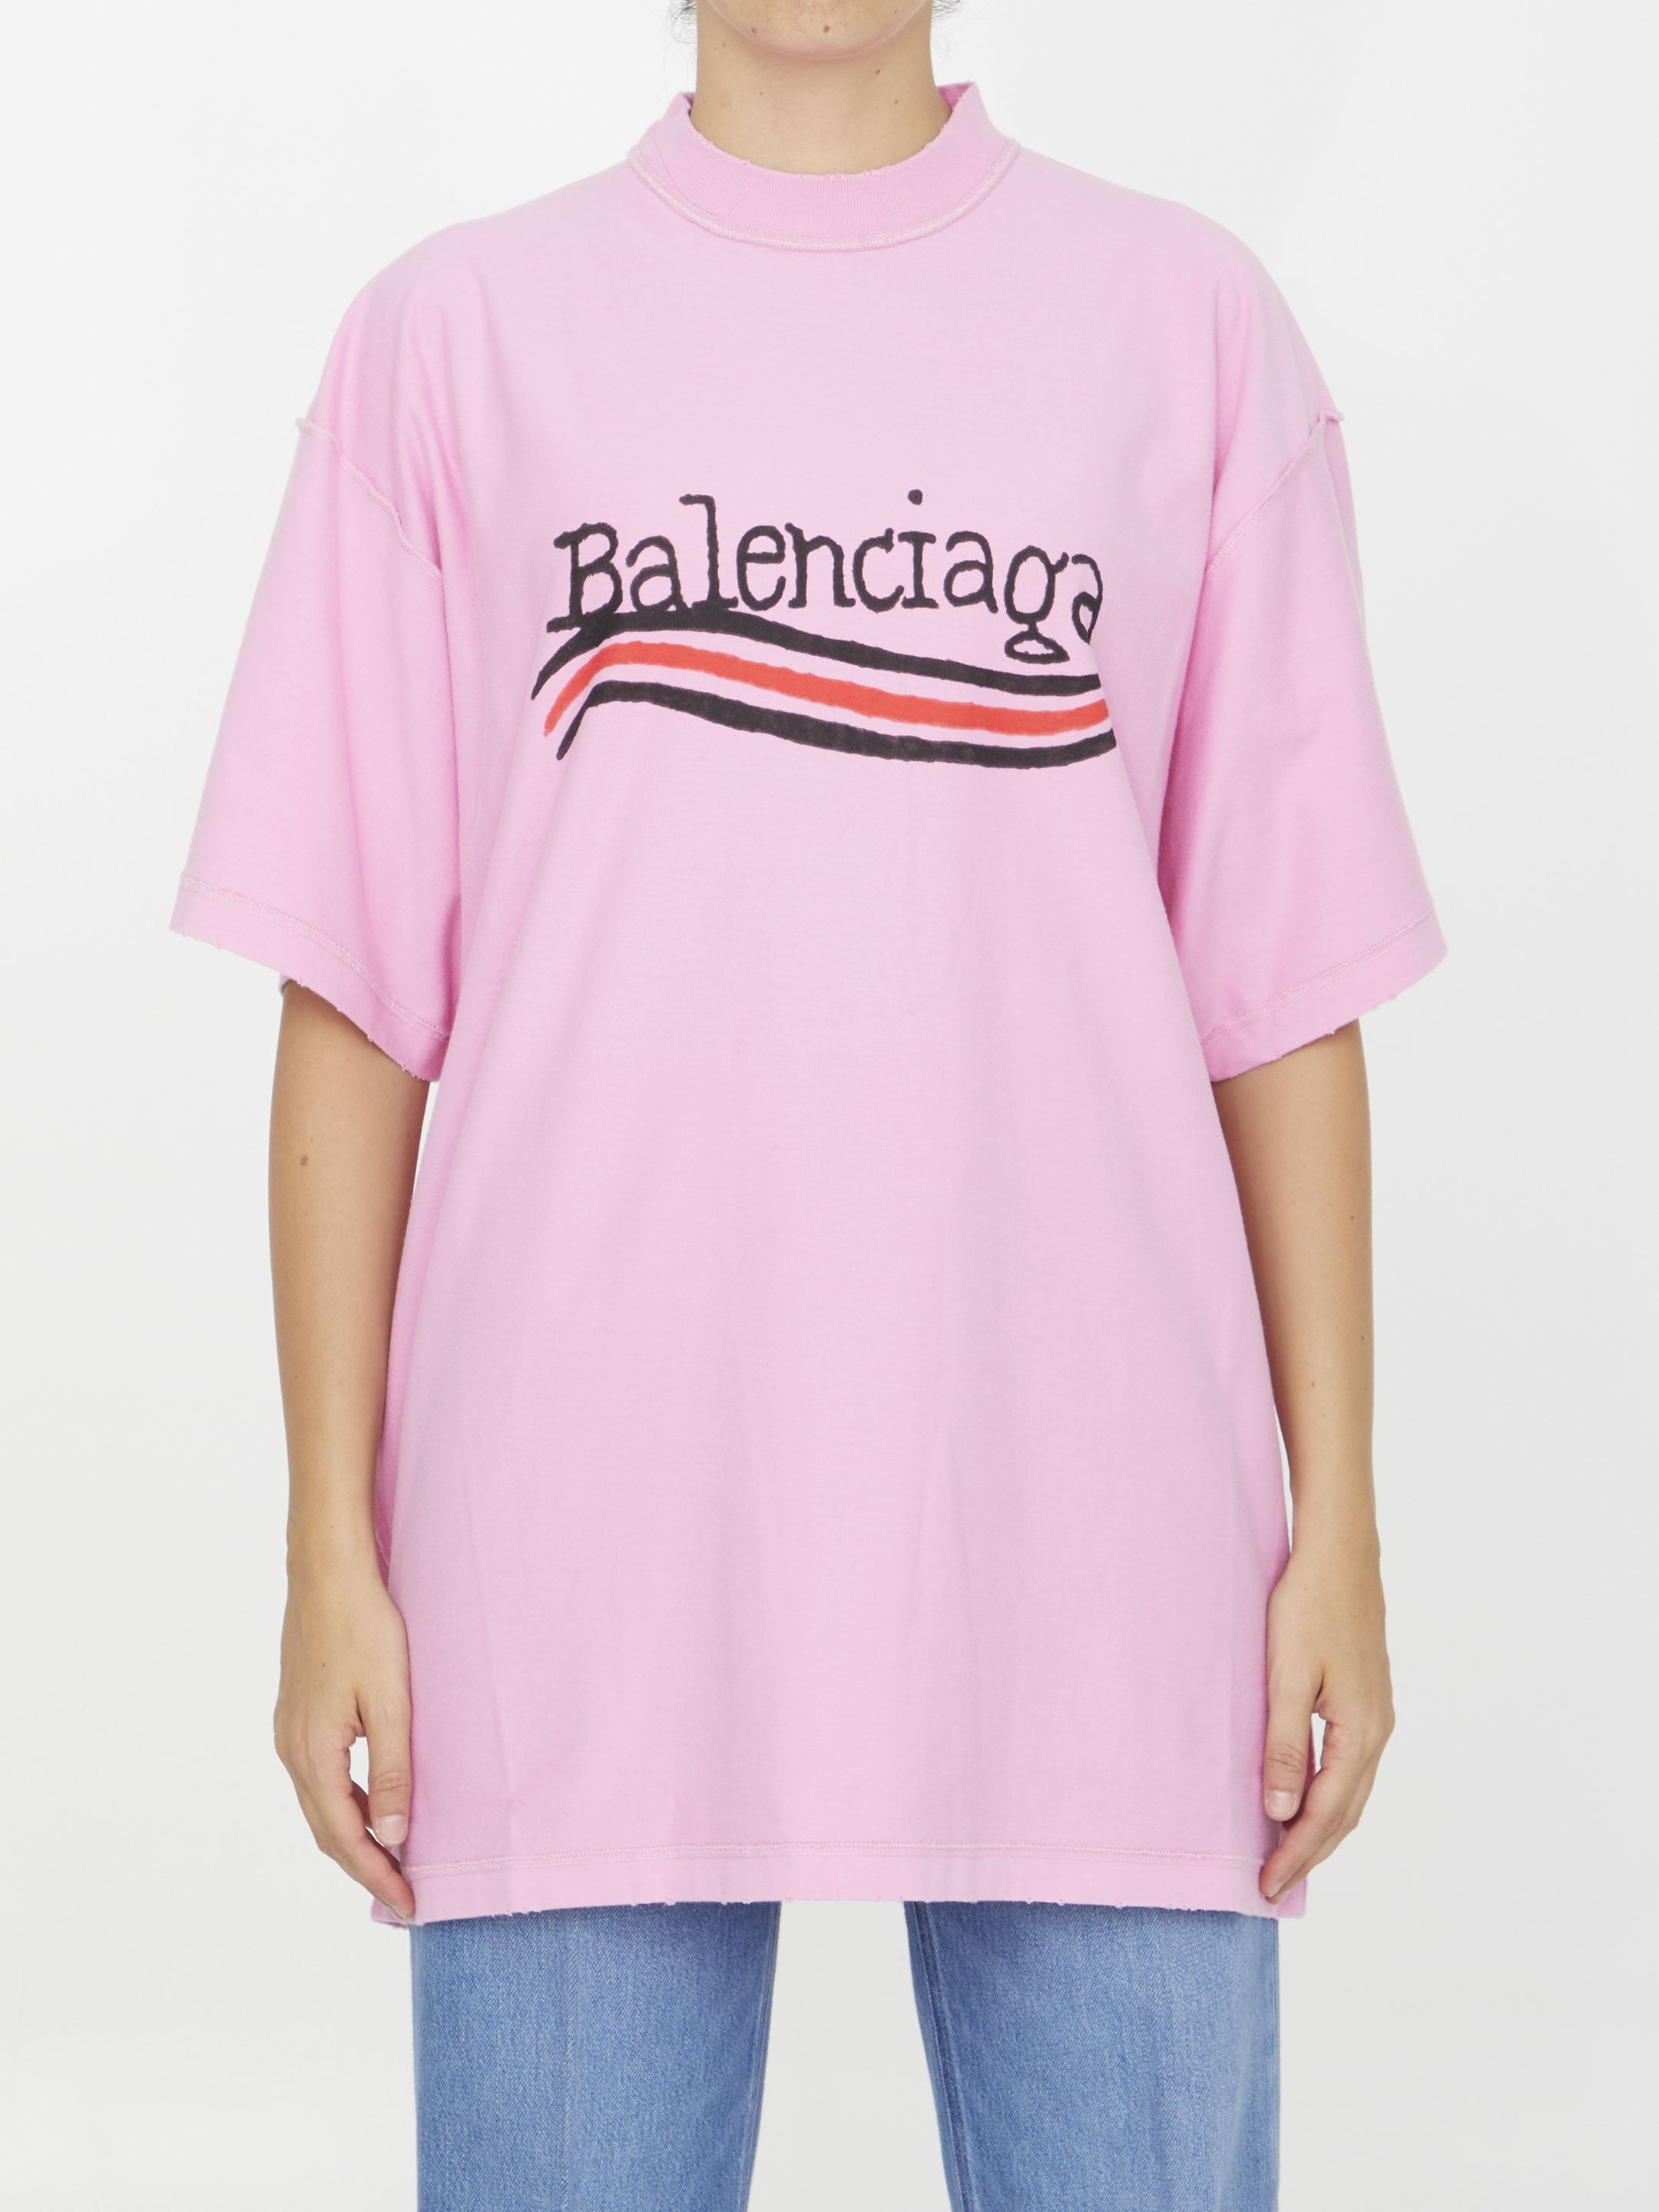 BALENCIAGA-OUTLET-SALE-Logo-t-shirt-Shirts-01-PINK-ARCHIVE-COLLECTION.jpg